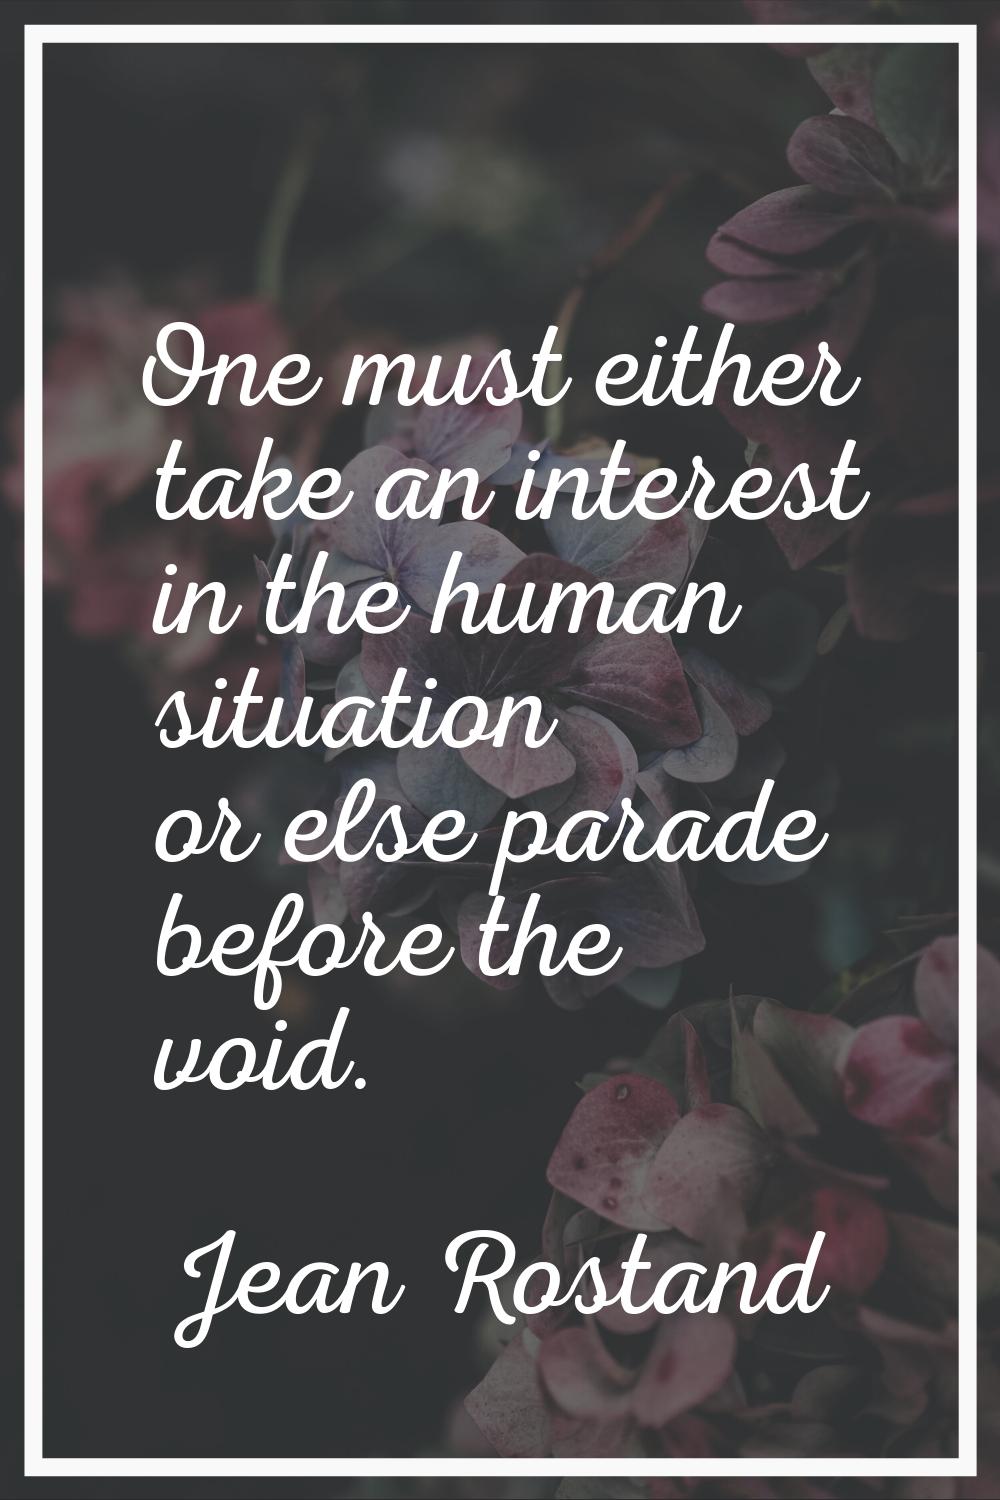 One must either take an interest in the human situation or else parade before the void.